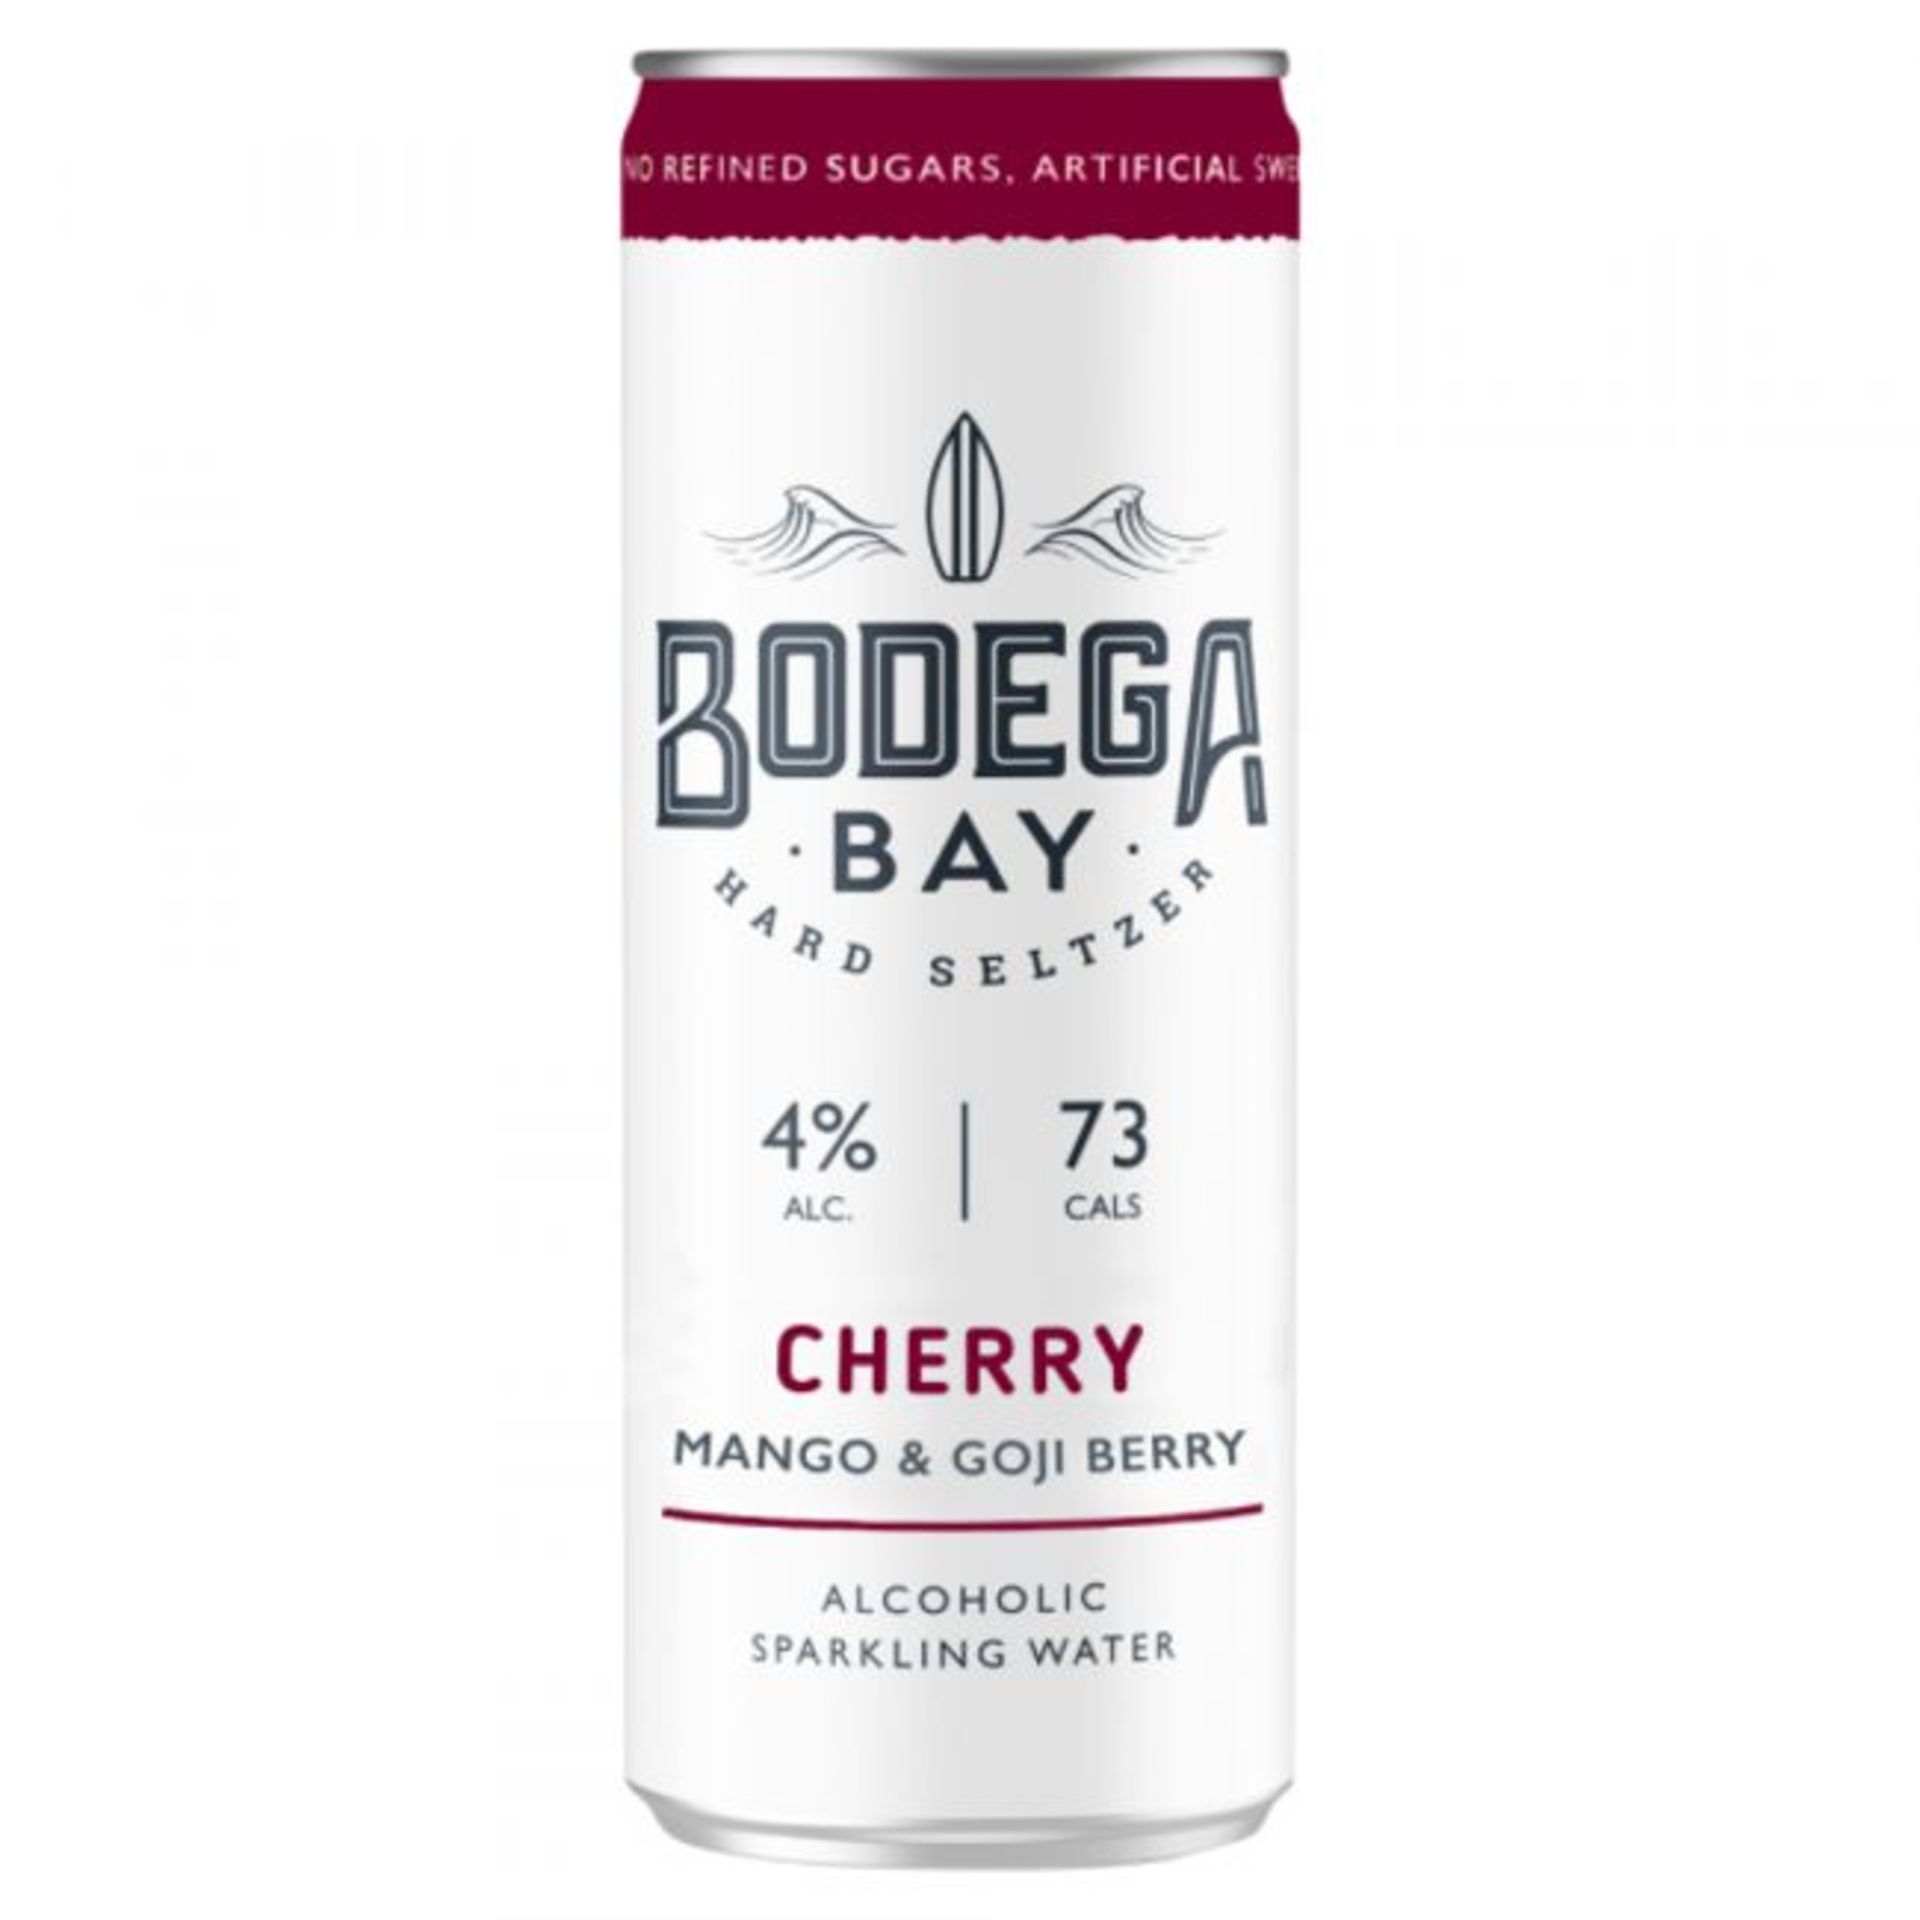 1,080 x Cans of Bodega Bay Hard Seltzer 250ml Alcoholic Sparkling Water Drinks - RESALE JOB LOT - Image 5 of 21